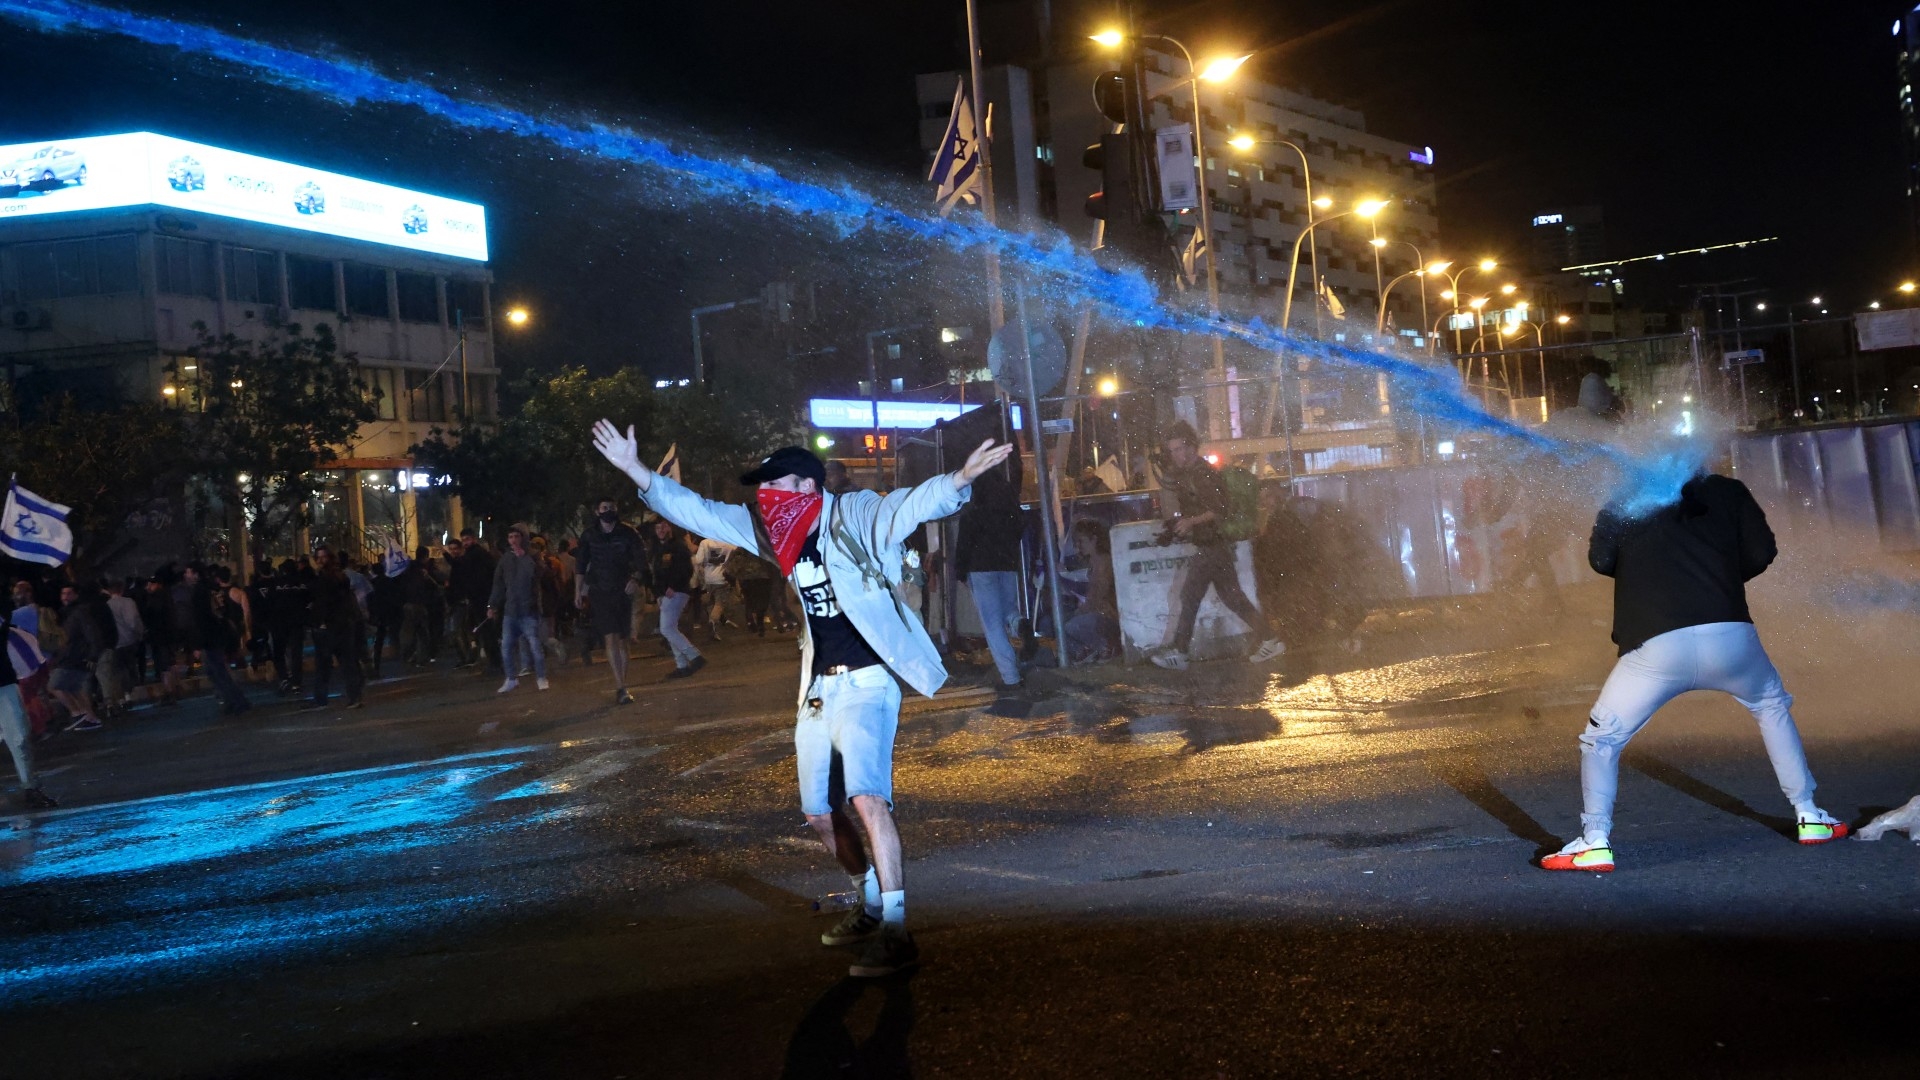 Israeli security forces use water canons to disperse protesters during demonstrations in Tel Aviv on 27 March 2023 (AFP)